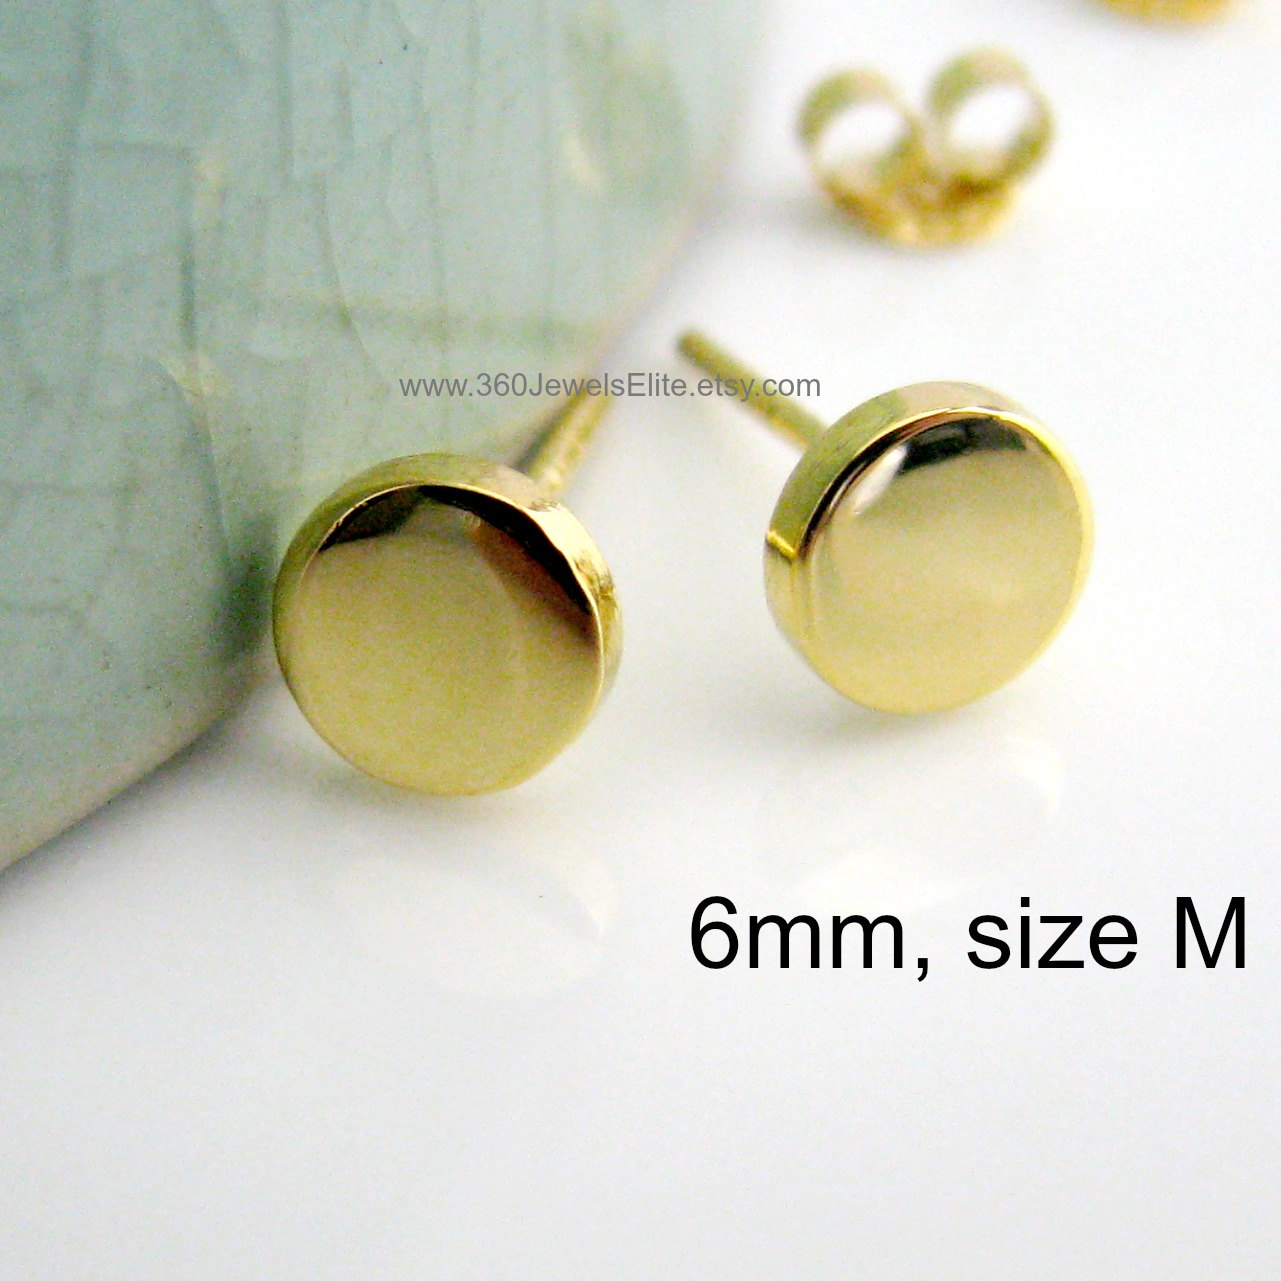 Mens gold stud earrings, brushed 24K gold plated over 925 silver